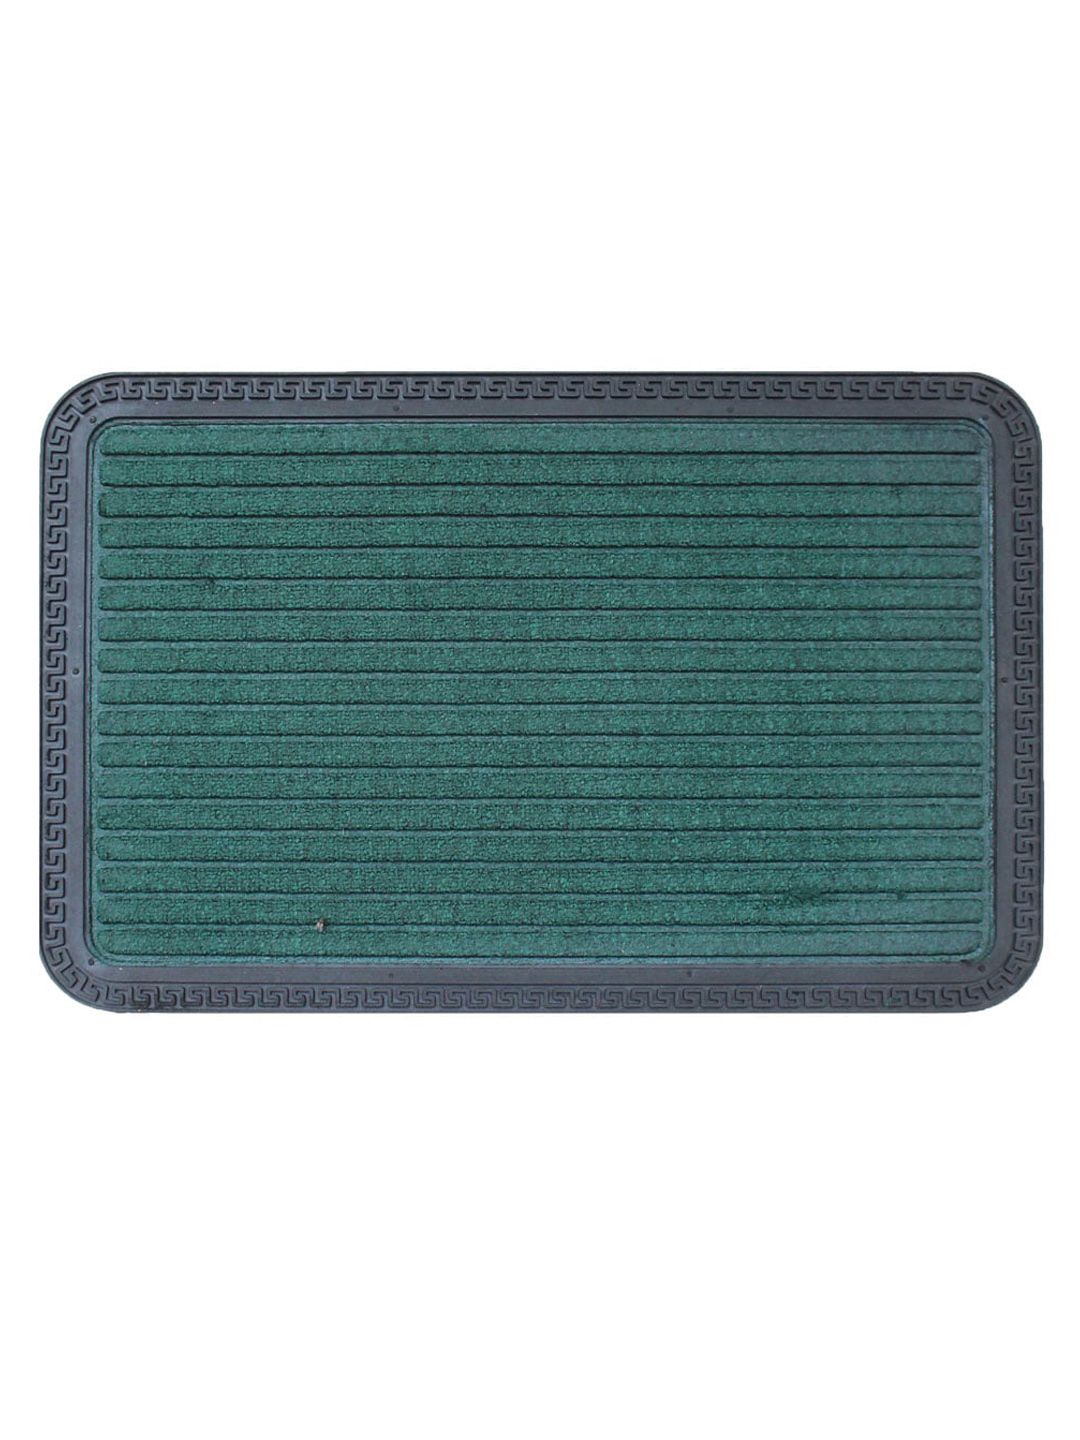 LUXEHOME INTERNATIONAL Green Rubber Striped Anti-Skid Doormat Price in India